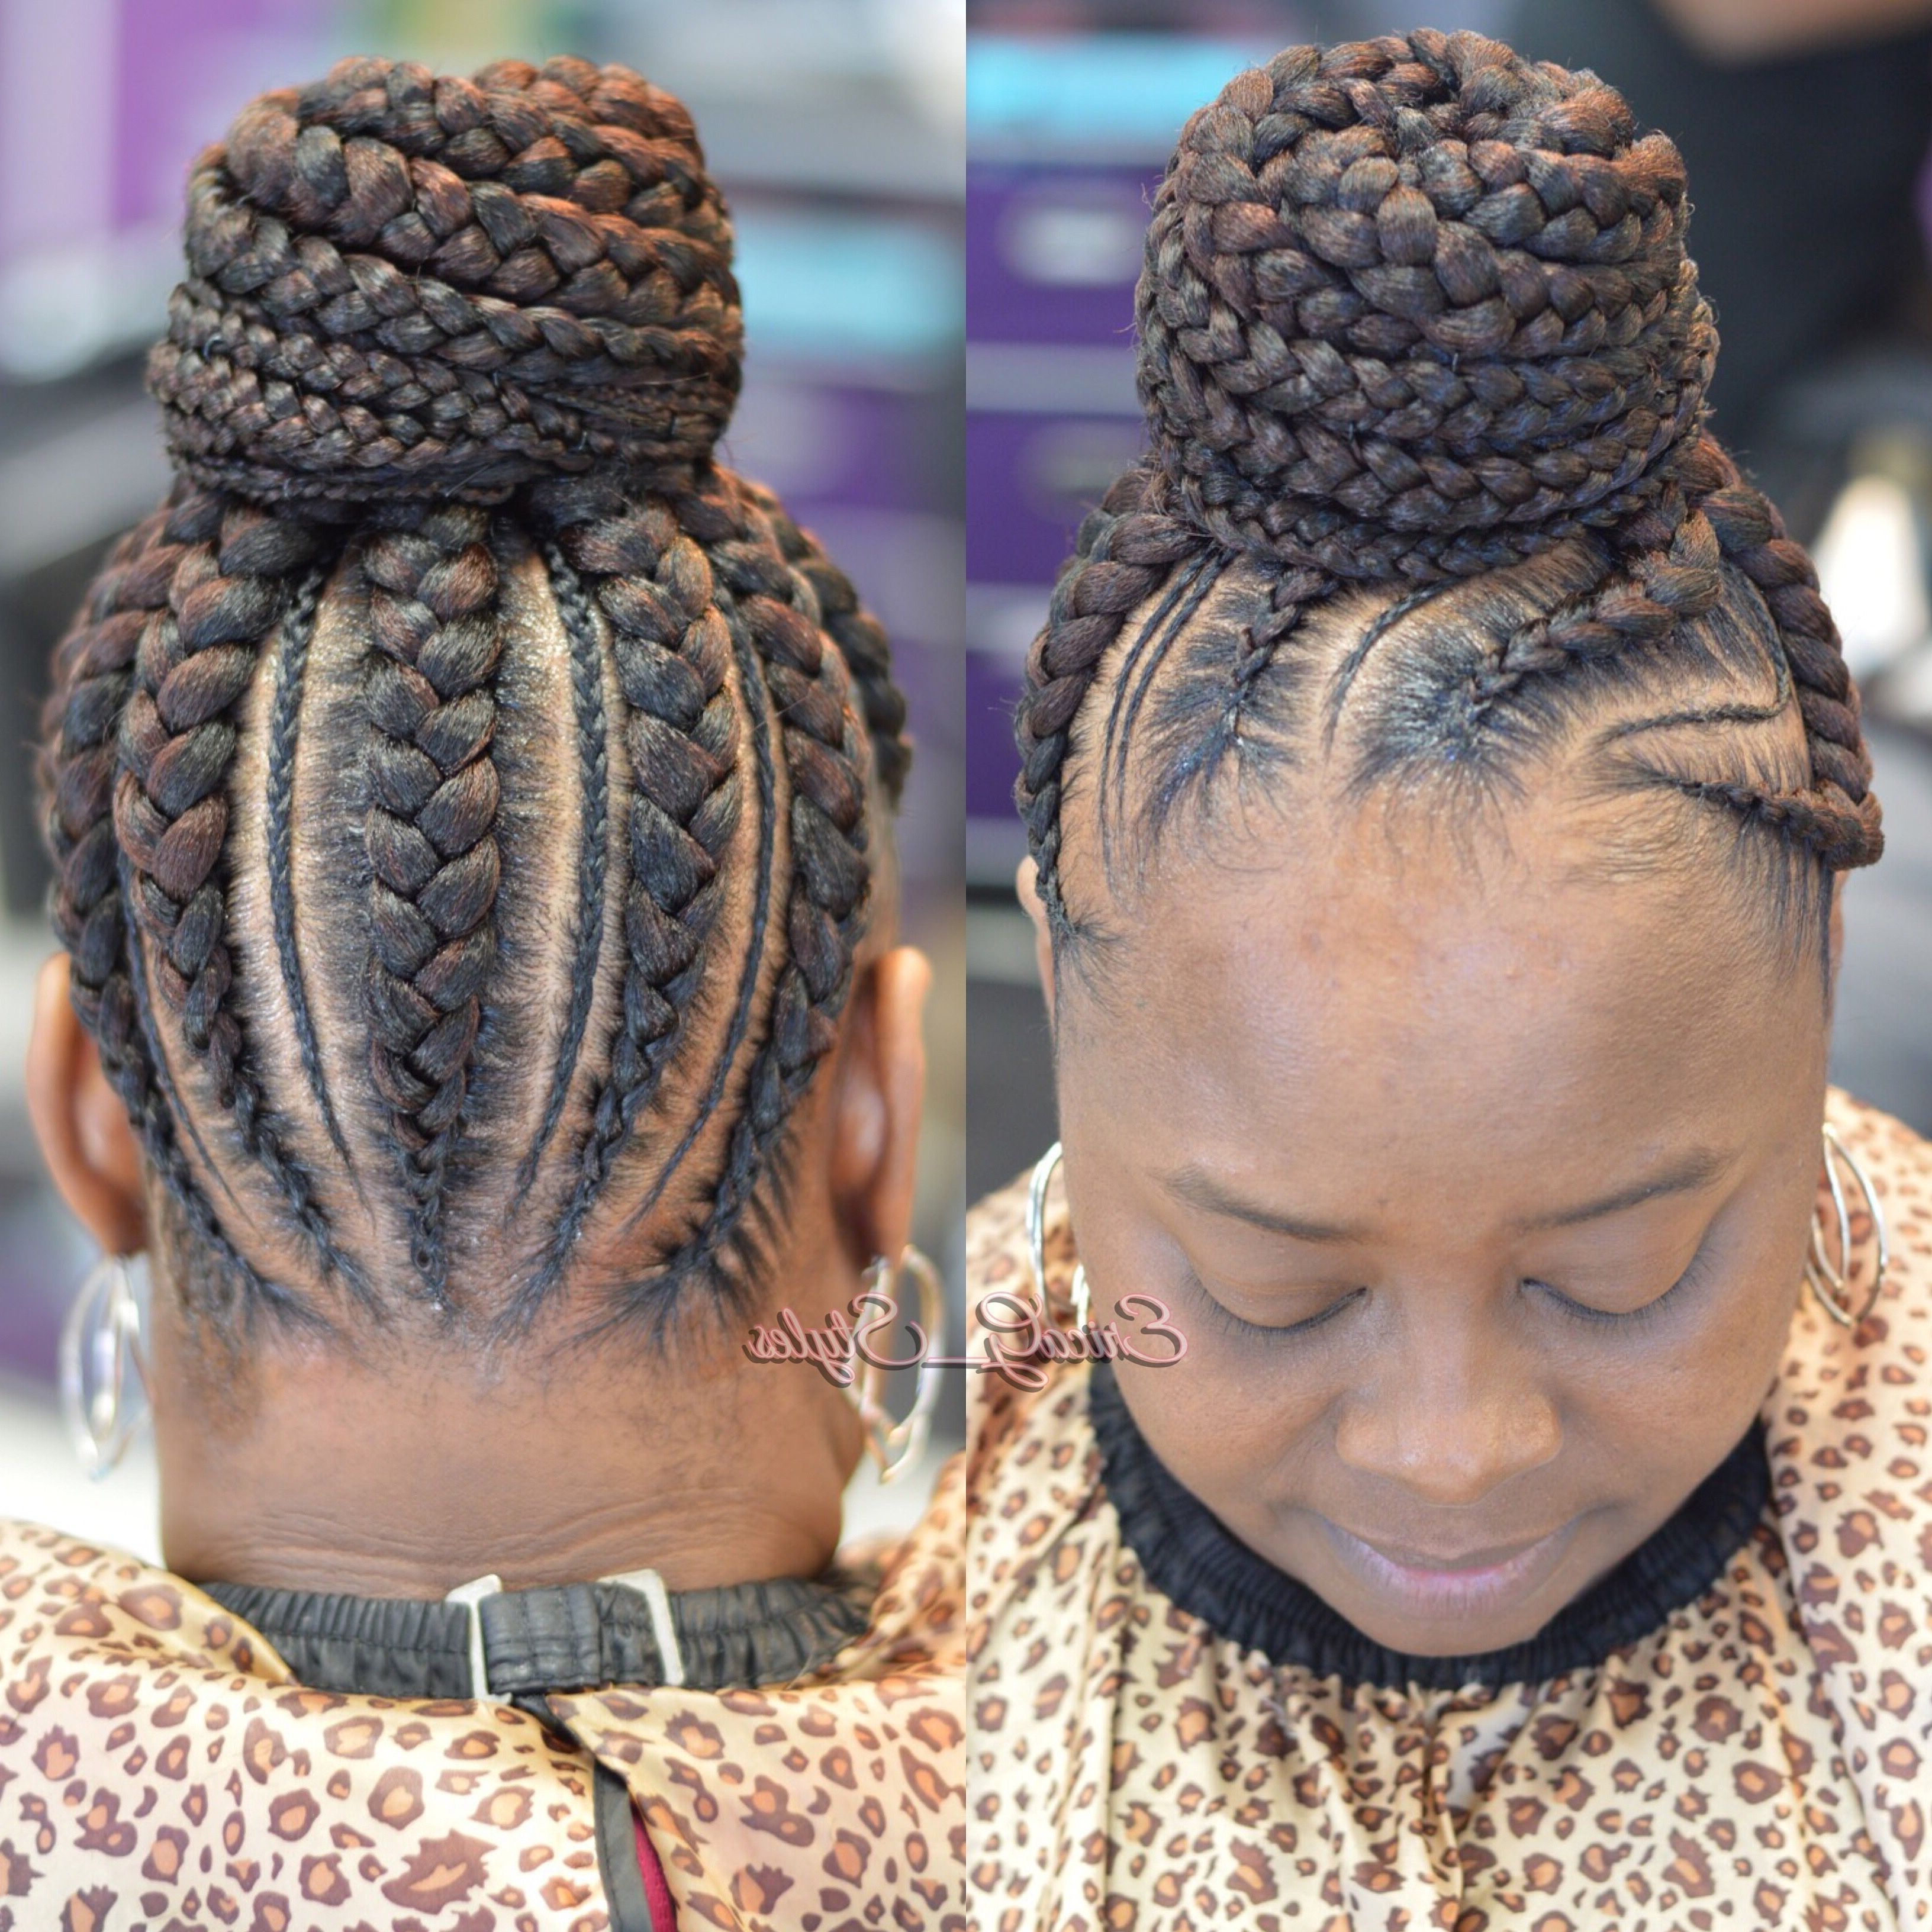 Best Ideas Of French Braid Hairstyles Black Hair Wonderful Pin Regarding Famous French Braid Hairstyles For Black Hair (View 13 of 15)